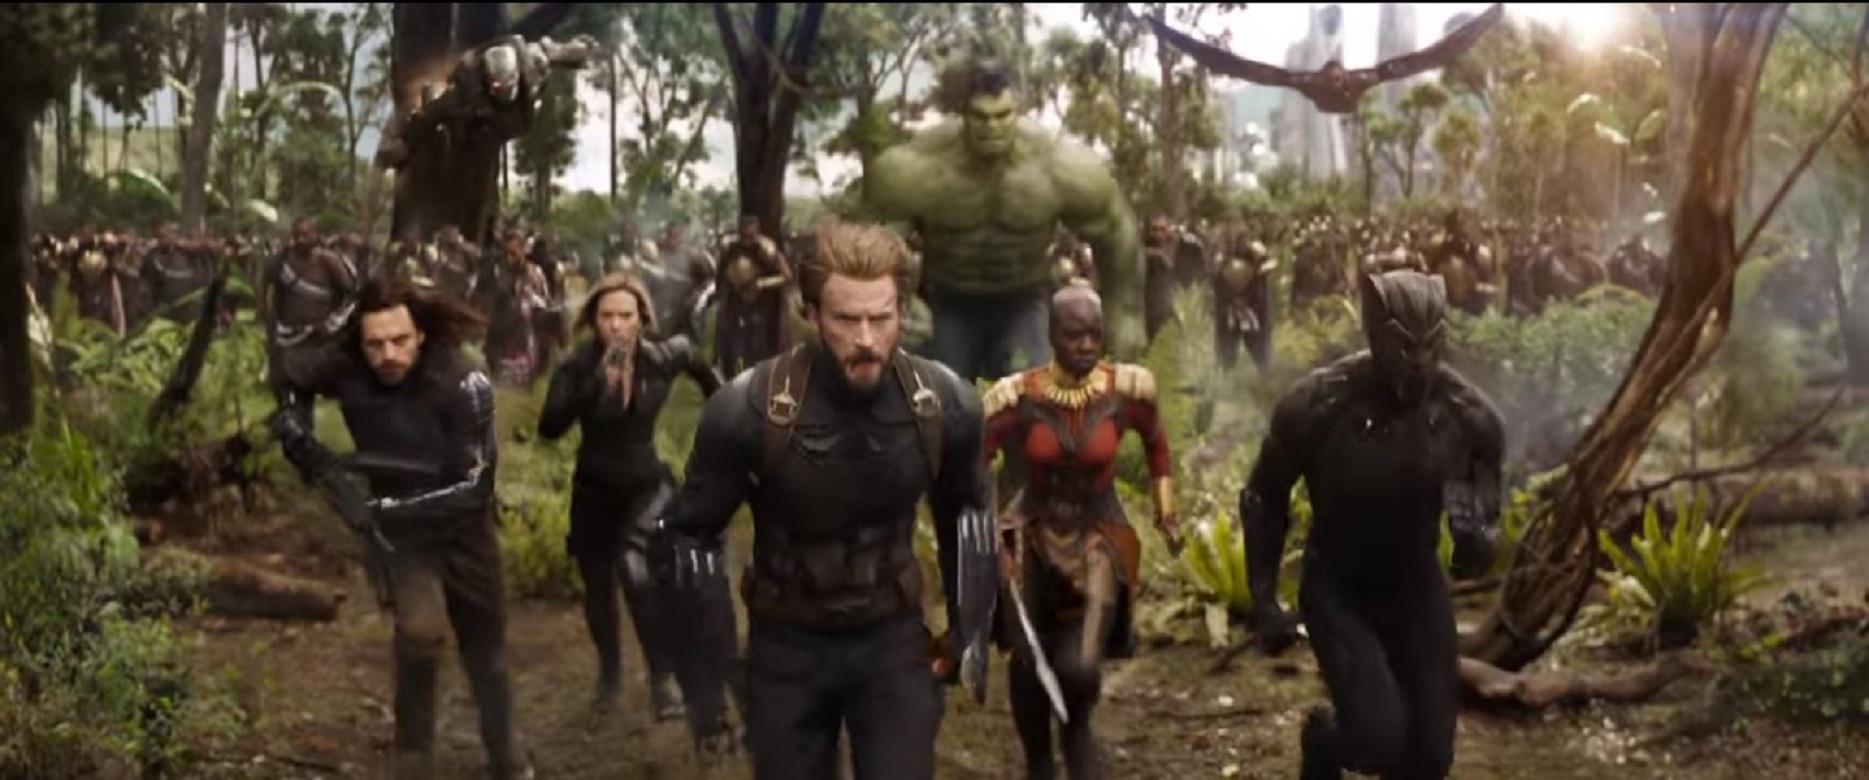 Avengers: Infinity War has been described as an ‘unprecedented cinematic journey 10 years in the making’ (Marvel Entertainment YouTube grab)